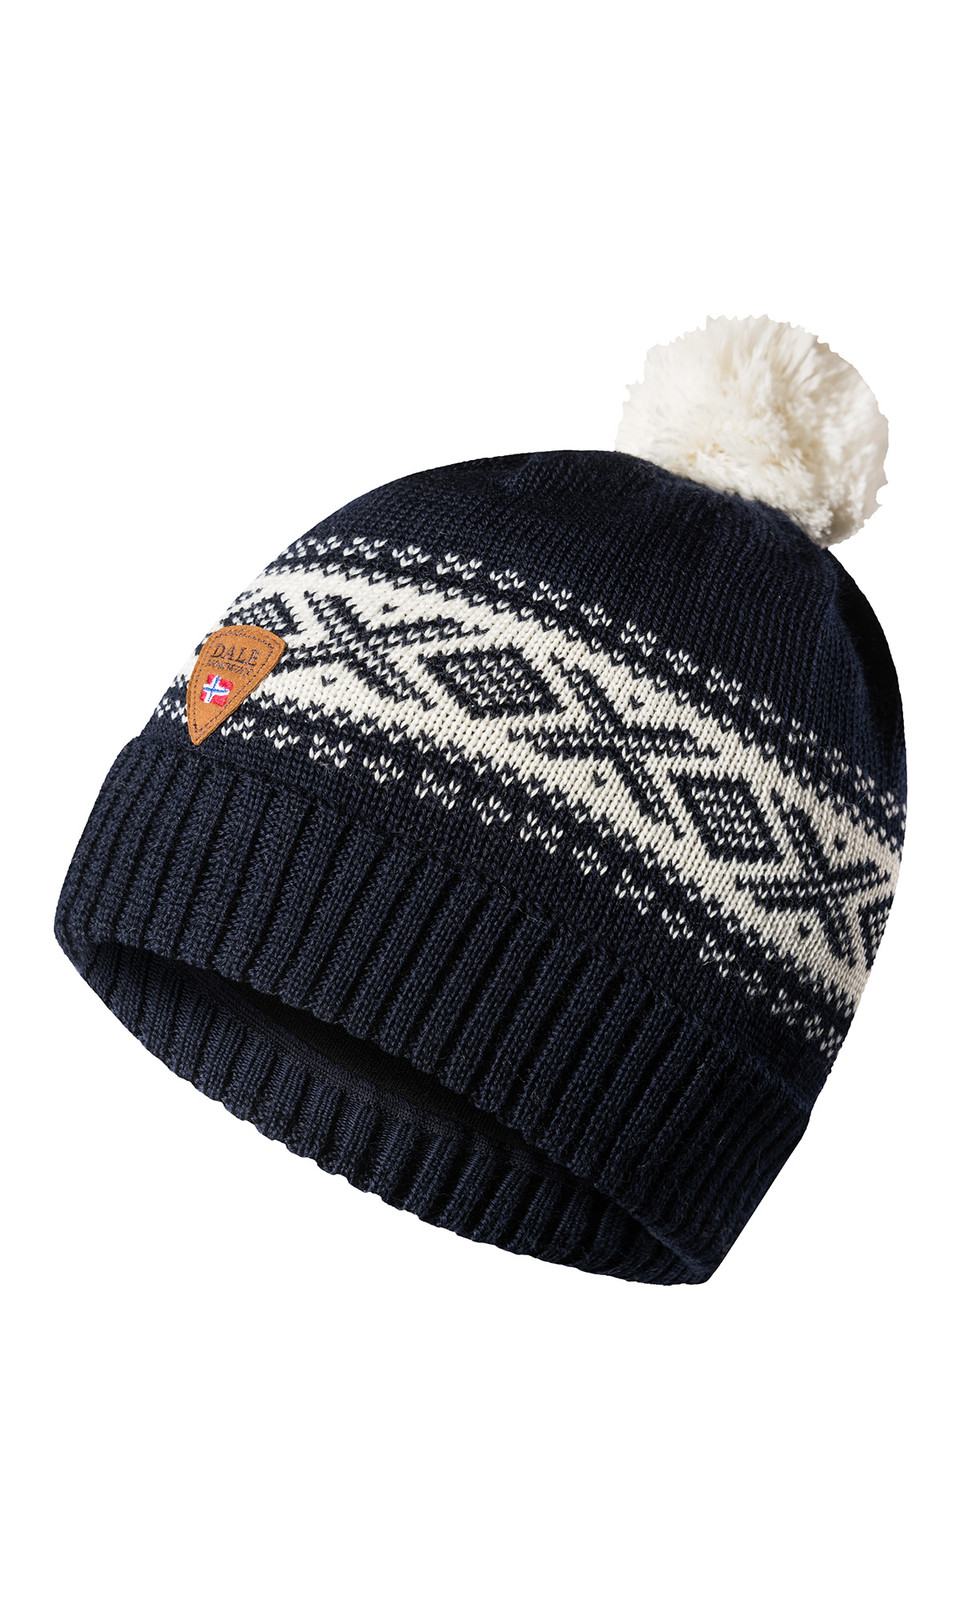 Dale of Norway Cortina Kids Hat 4/8 - Navy/Off White, 43341-_product